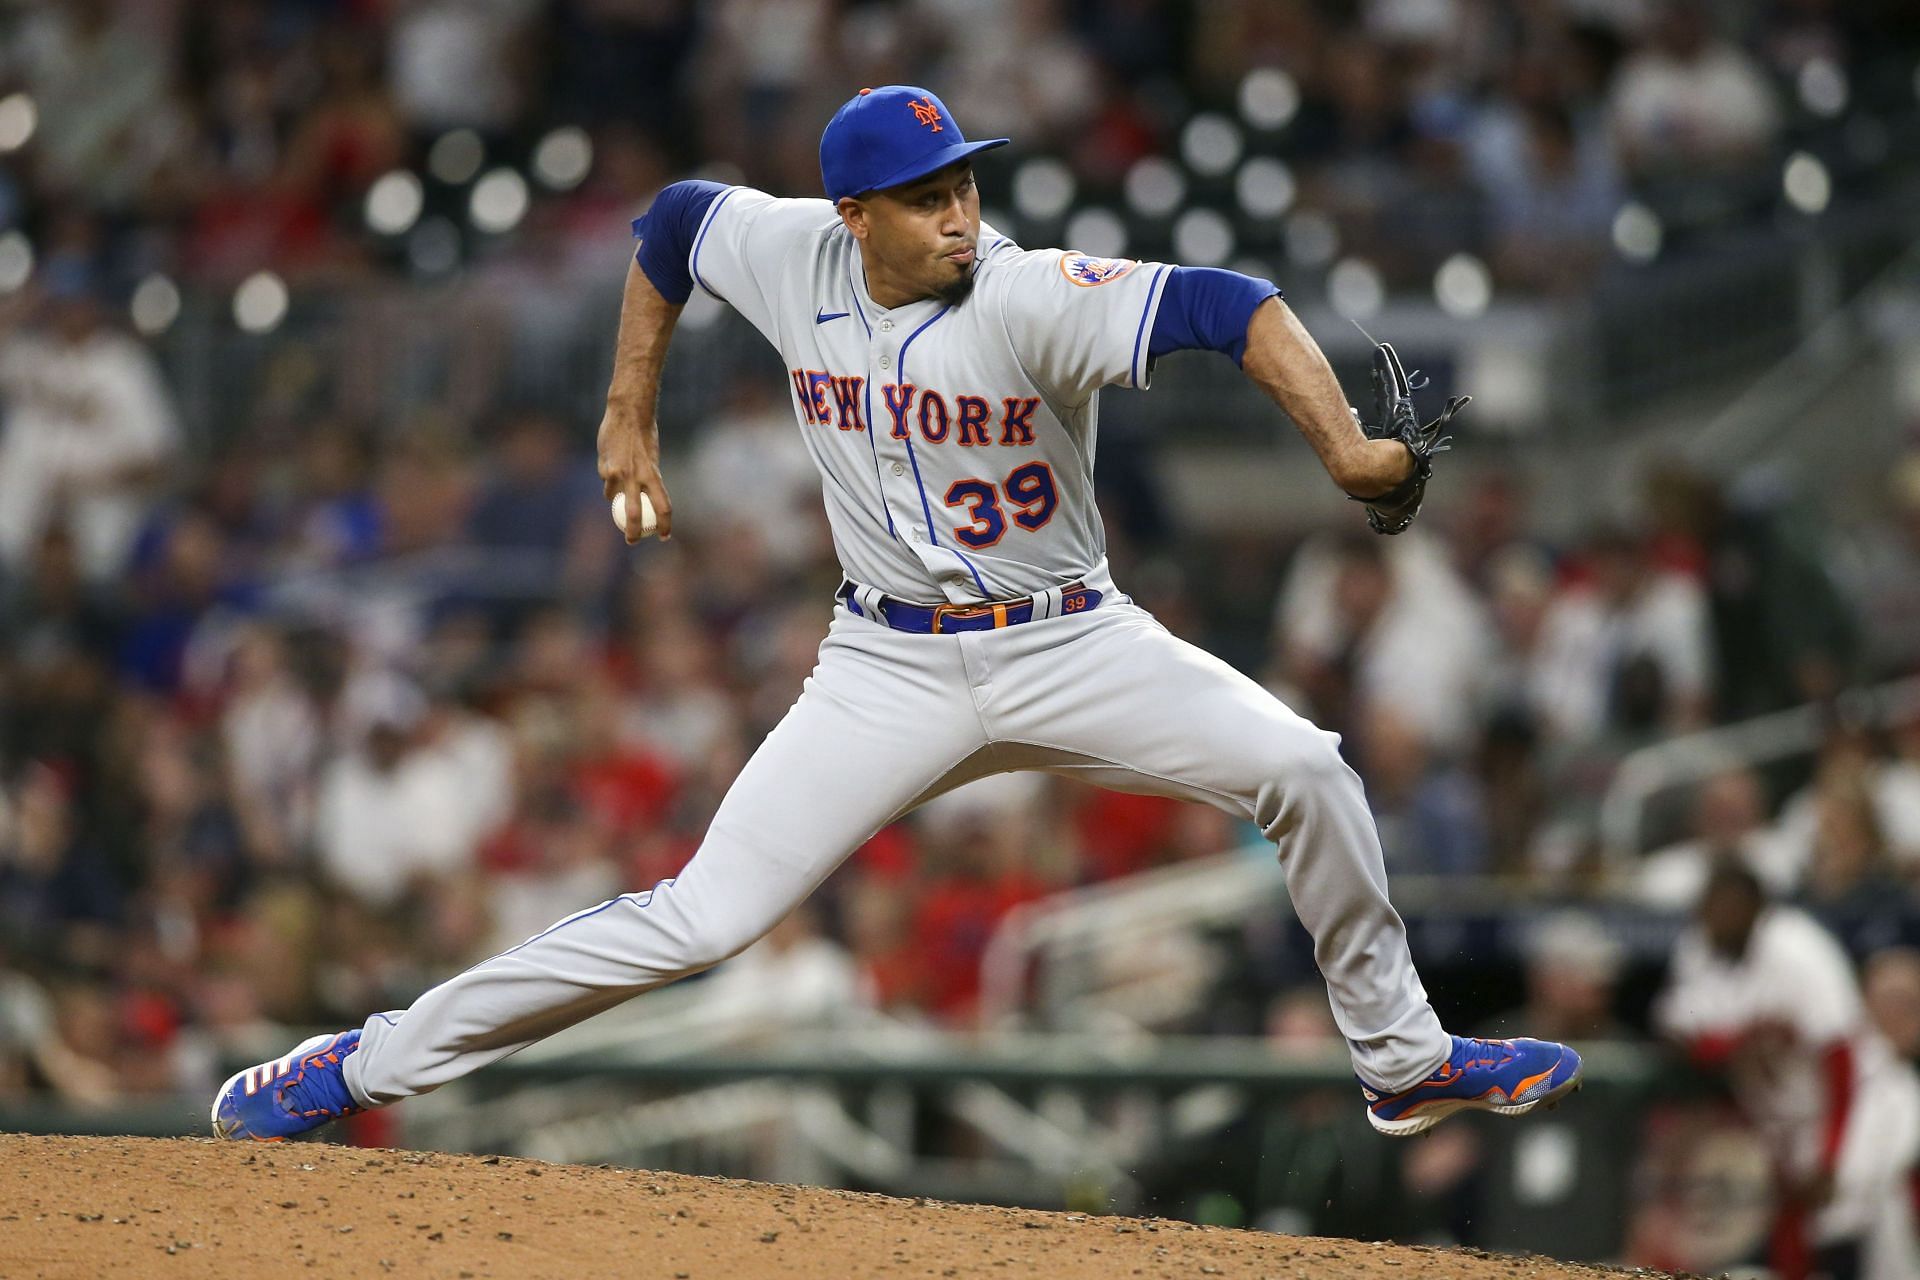 Edwin Diaz was one of four Mets selected for the All-Star Game.